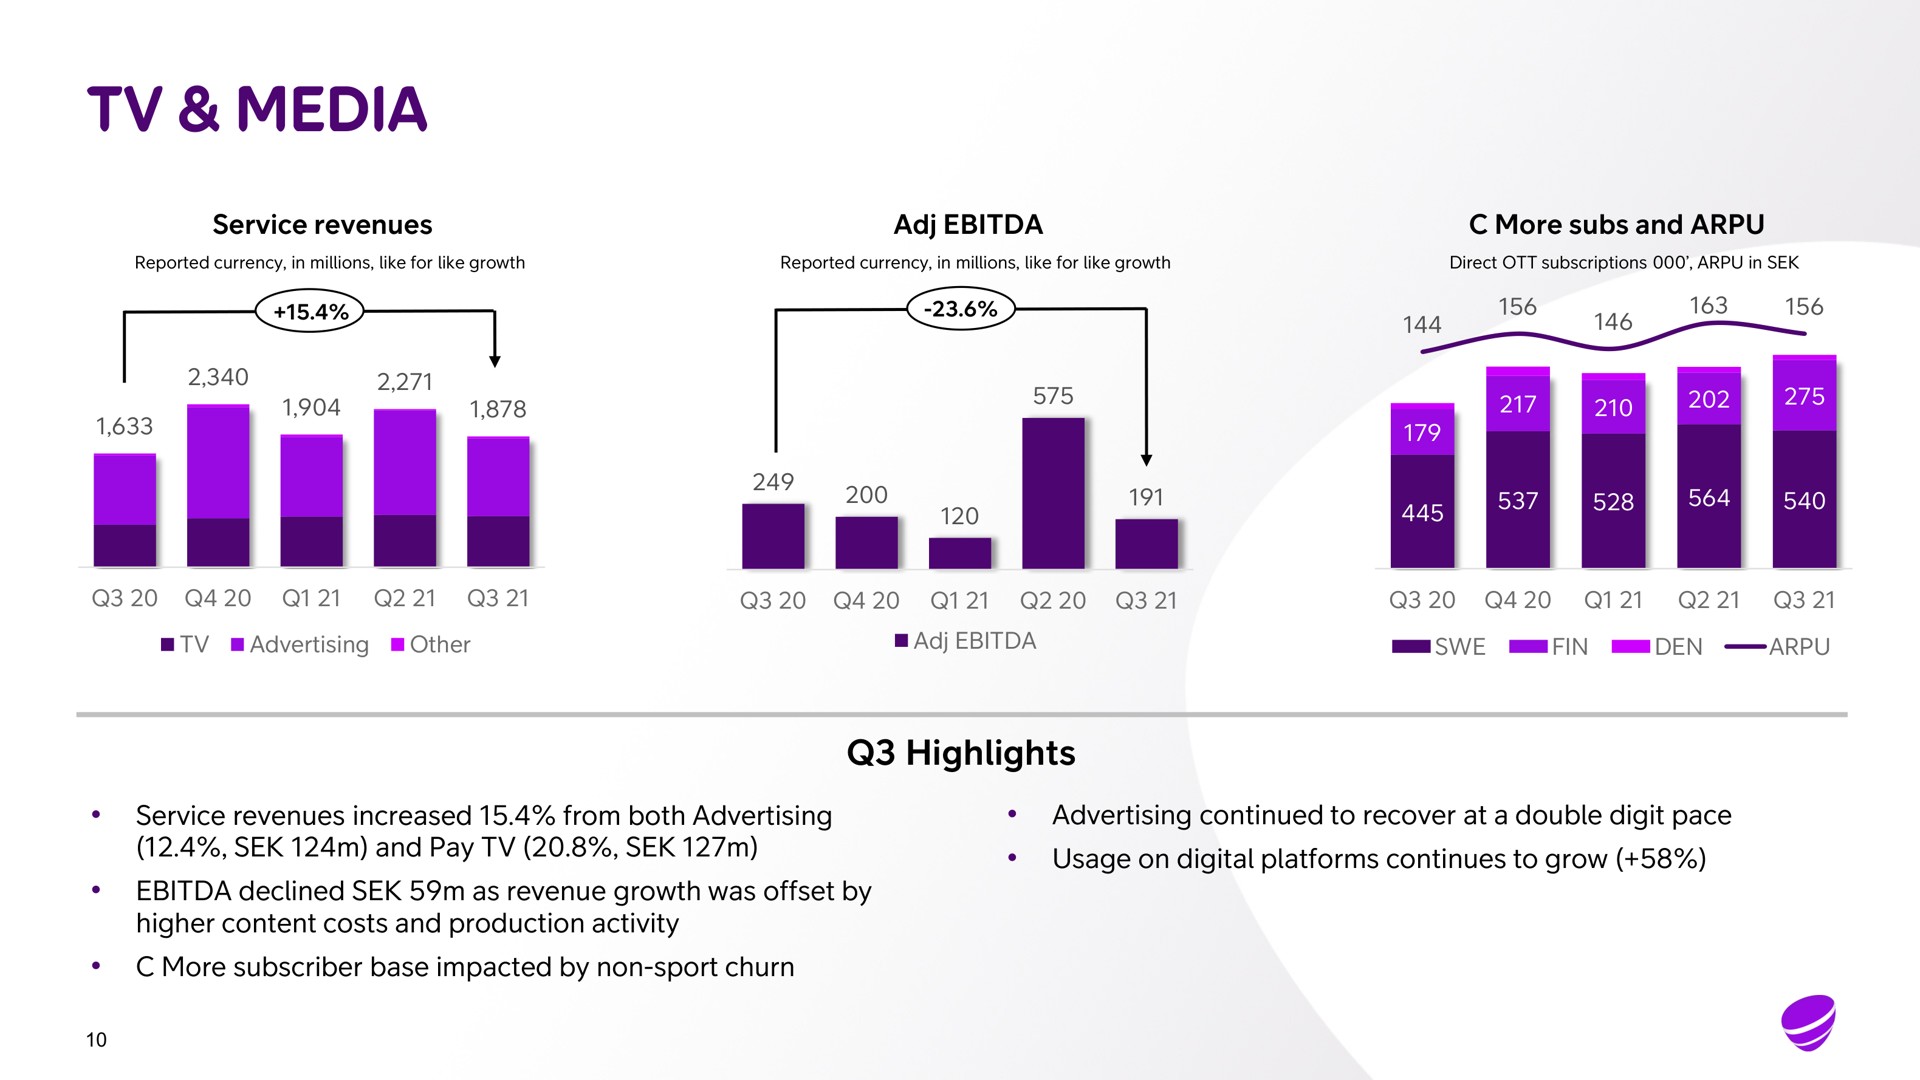 media service revenues more subs and highlights service revenues increased from both advertising and pay declined as revenue growth was offset by higher content costs and production activity more subscriber base impacted by non sport churn advertising continued to recover at a double digit pace usage on digital platforms continues to grow other | Telia Company